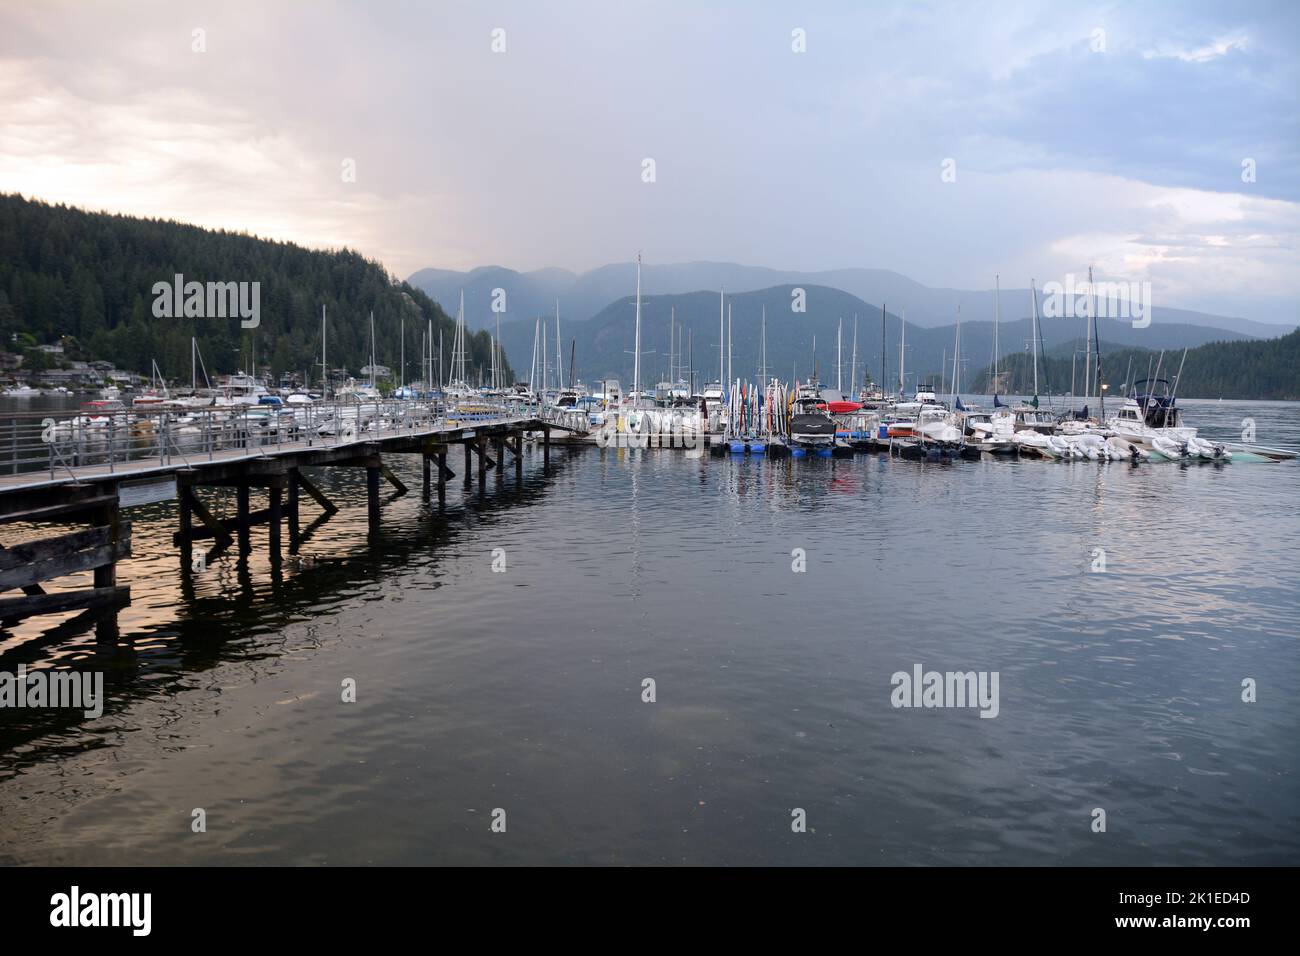 The marina and North Shore Mountains in the community of Deep Cove on Burrard Inlet/Indian Arm, North Vancouver, British Columbia, Canada. Stock Photo